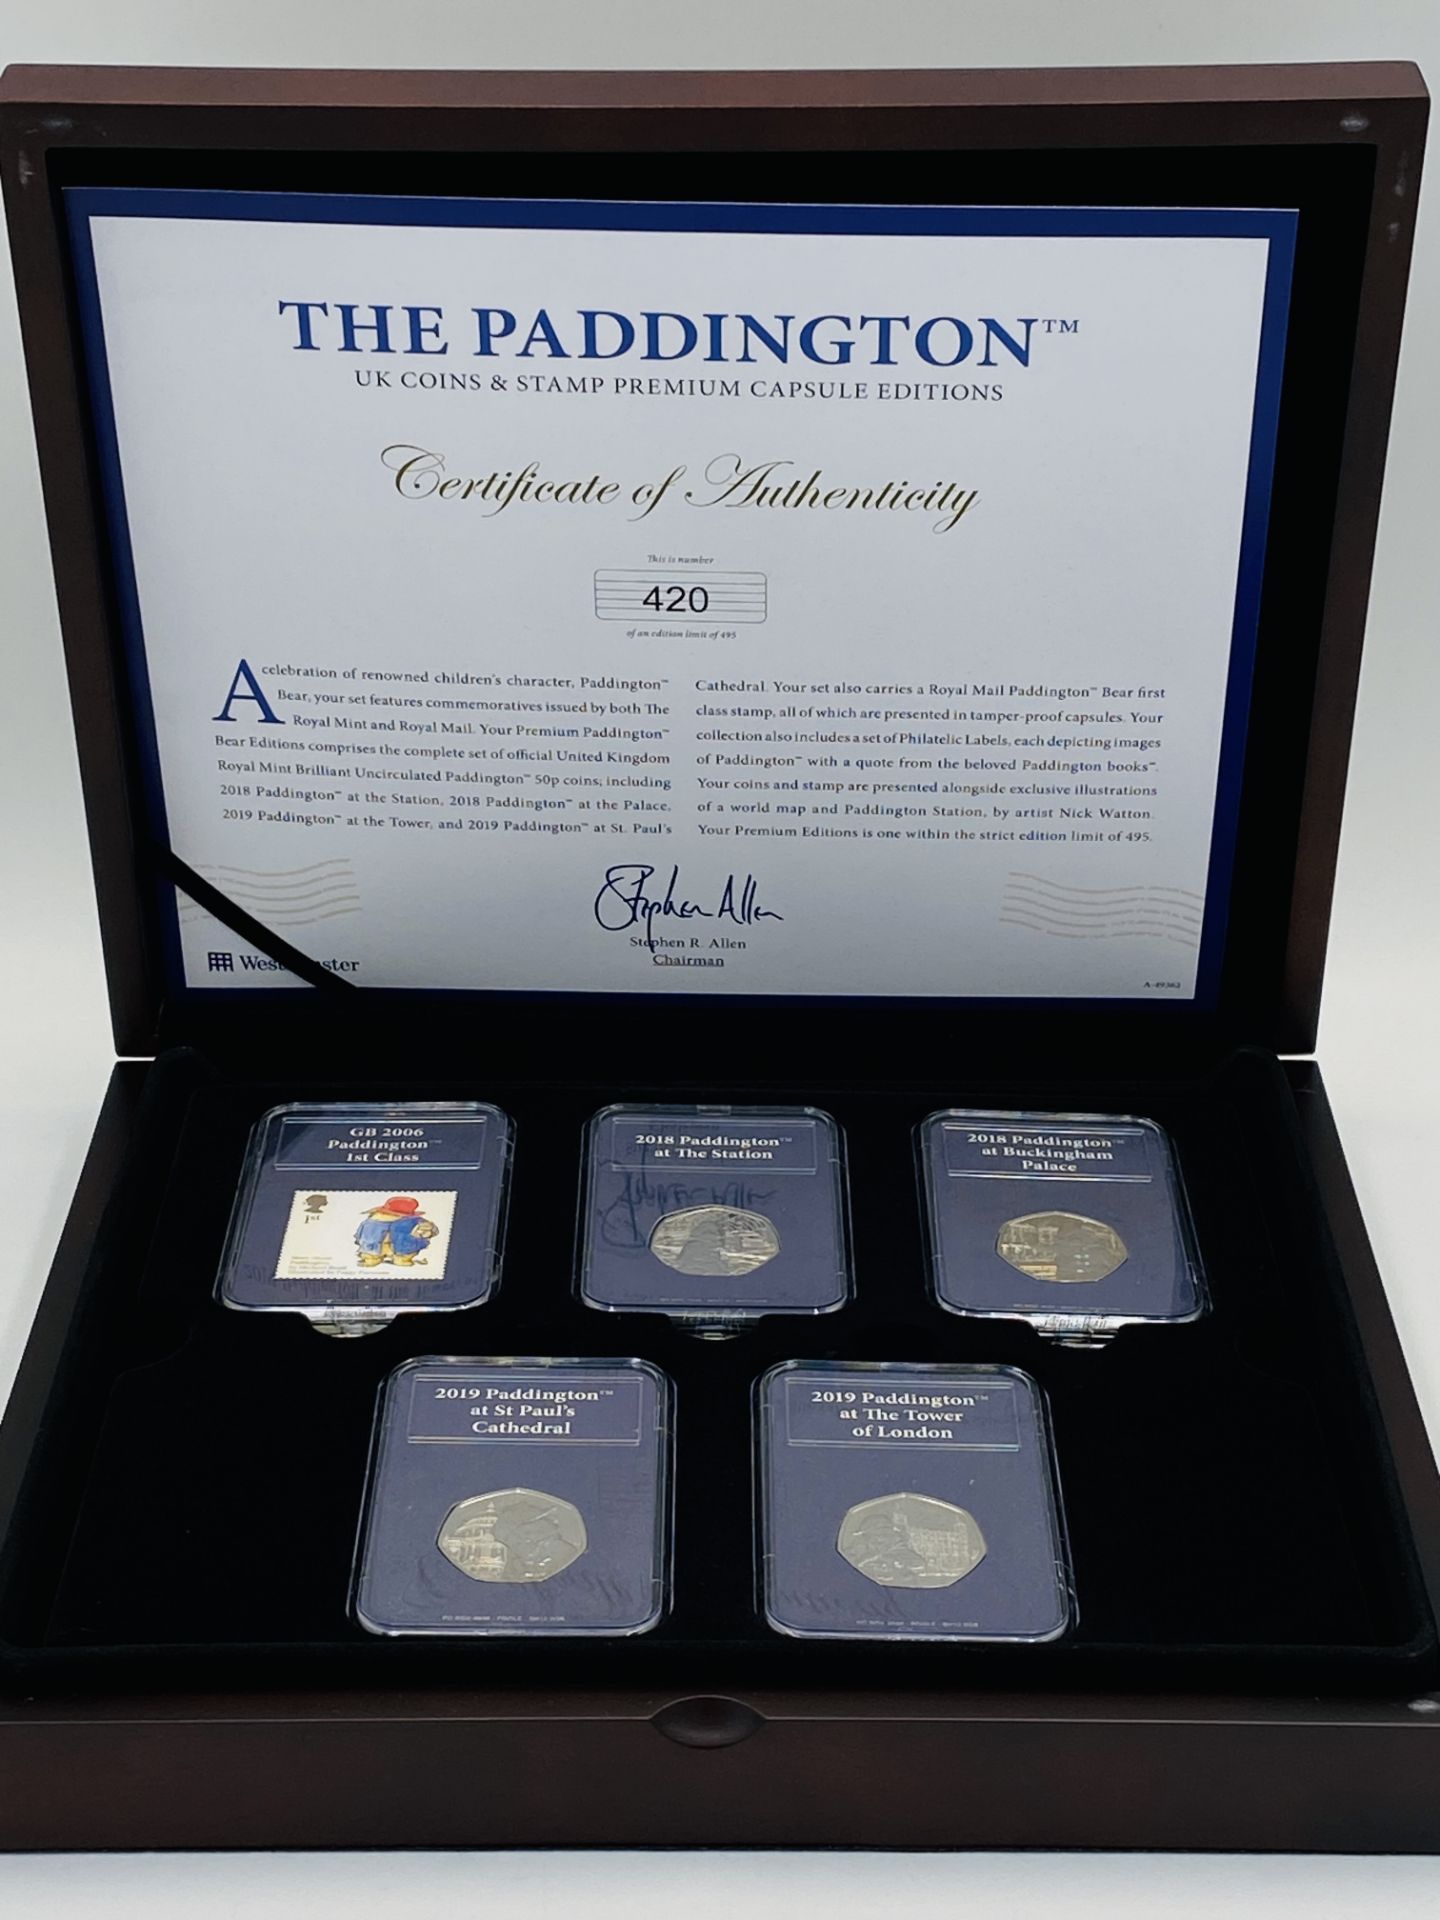 Westminster Limited Edition Paddington Coin and Stamp Capsule collection - Image 3 of 3